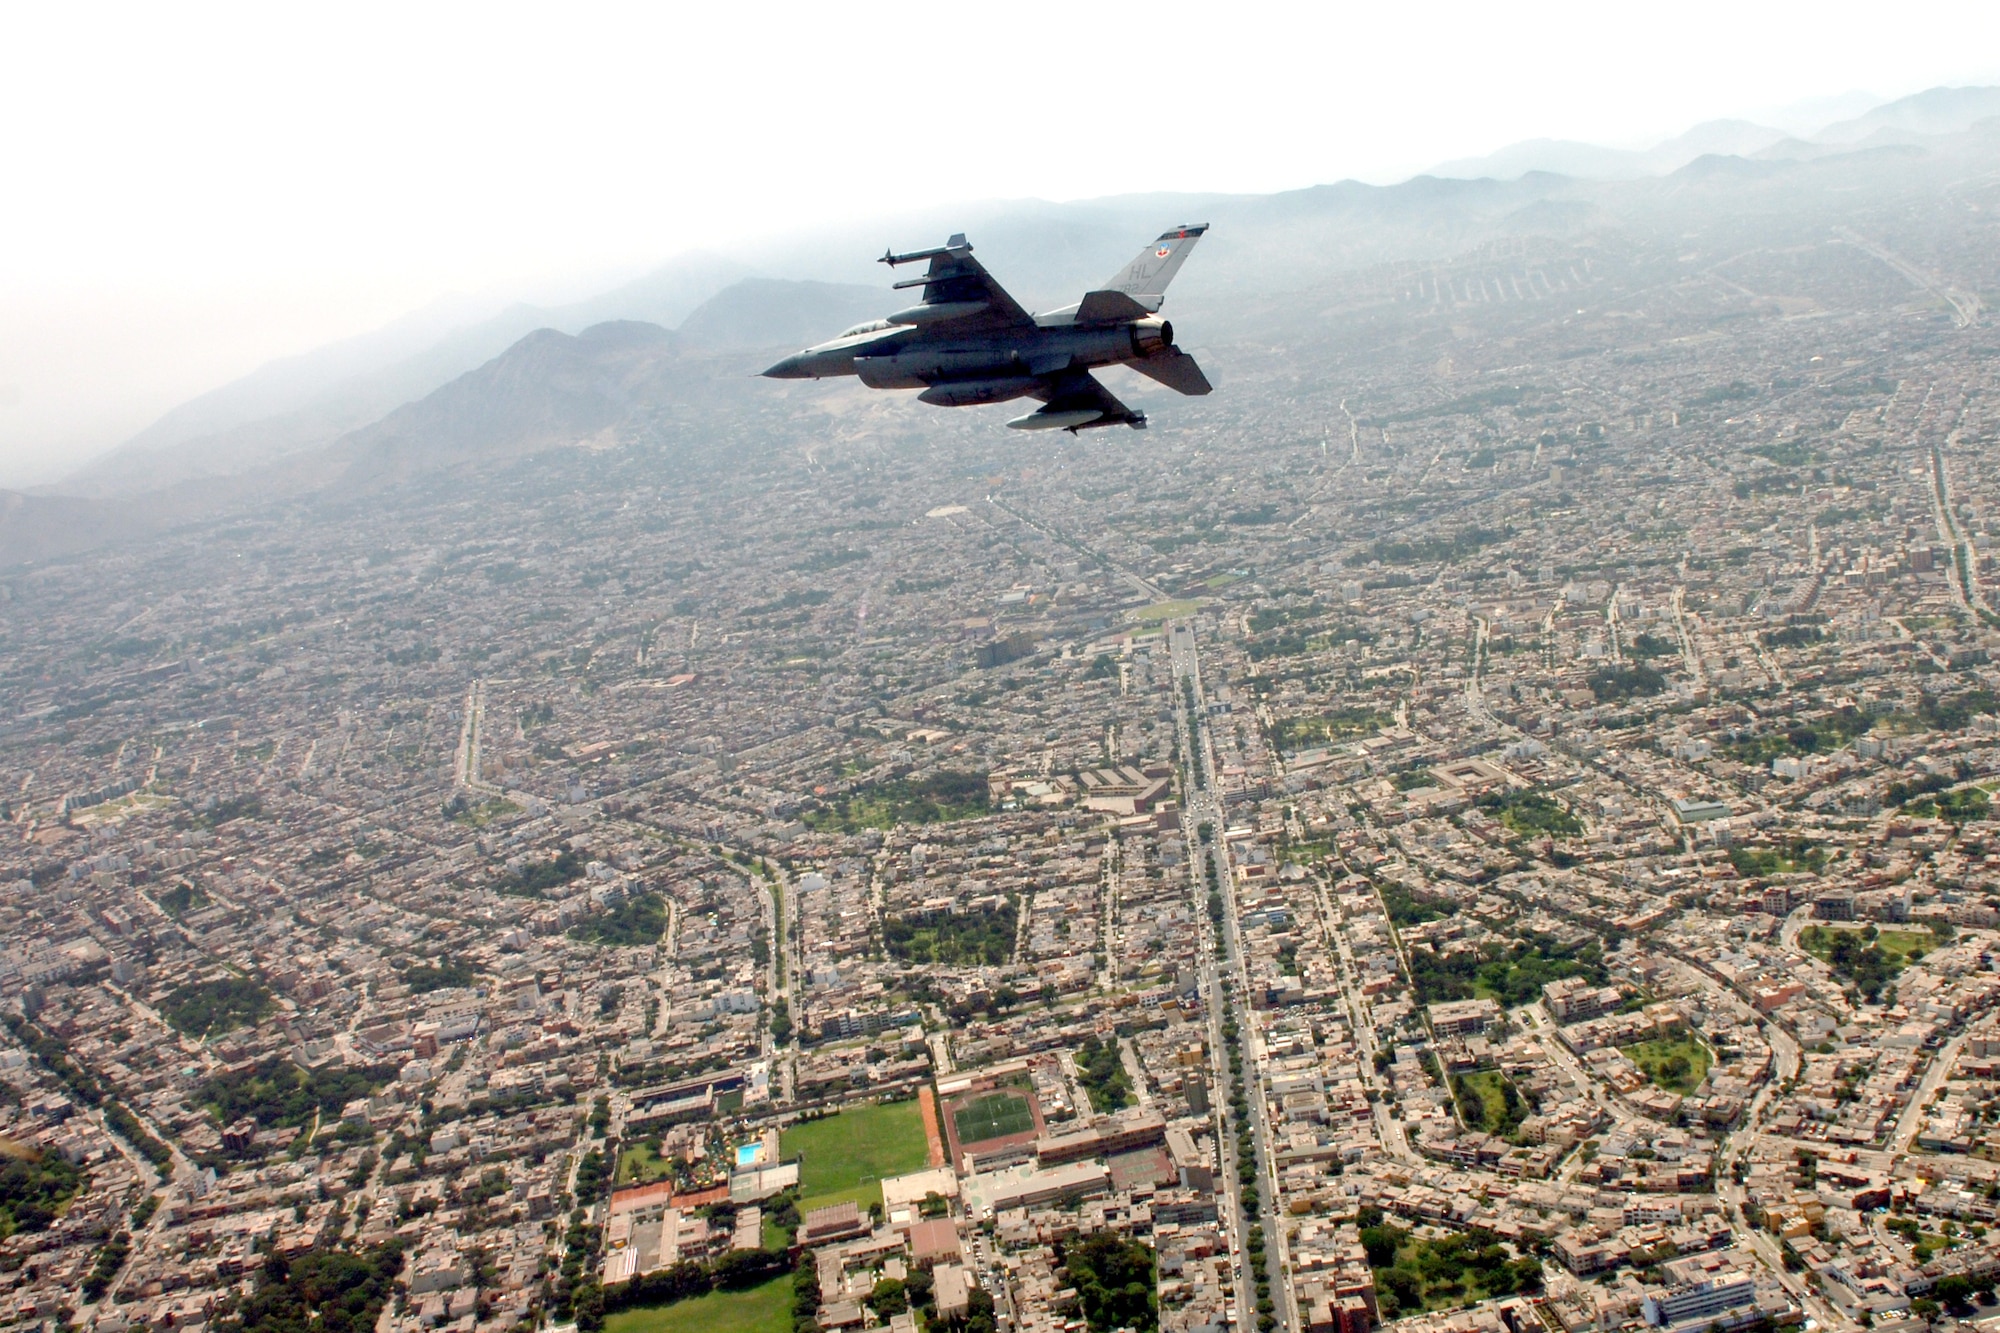 An F-16 Fighting Falcon Utah flies over Lima, Peru, on its way to the city for a joint air show with the Peruvian Air Force. The Peruvian air show will be the first of the year for aircraft from the 12th Air Force and Air Forces Southern. The F-16 is from the 34th Fighter Squadron at Hill Air Force Base, Utah. (U.S. Air Force photo/Tech. Sgt. Eric Kreps)